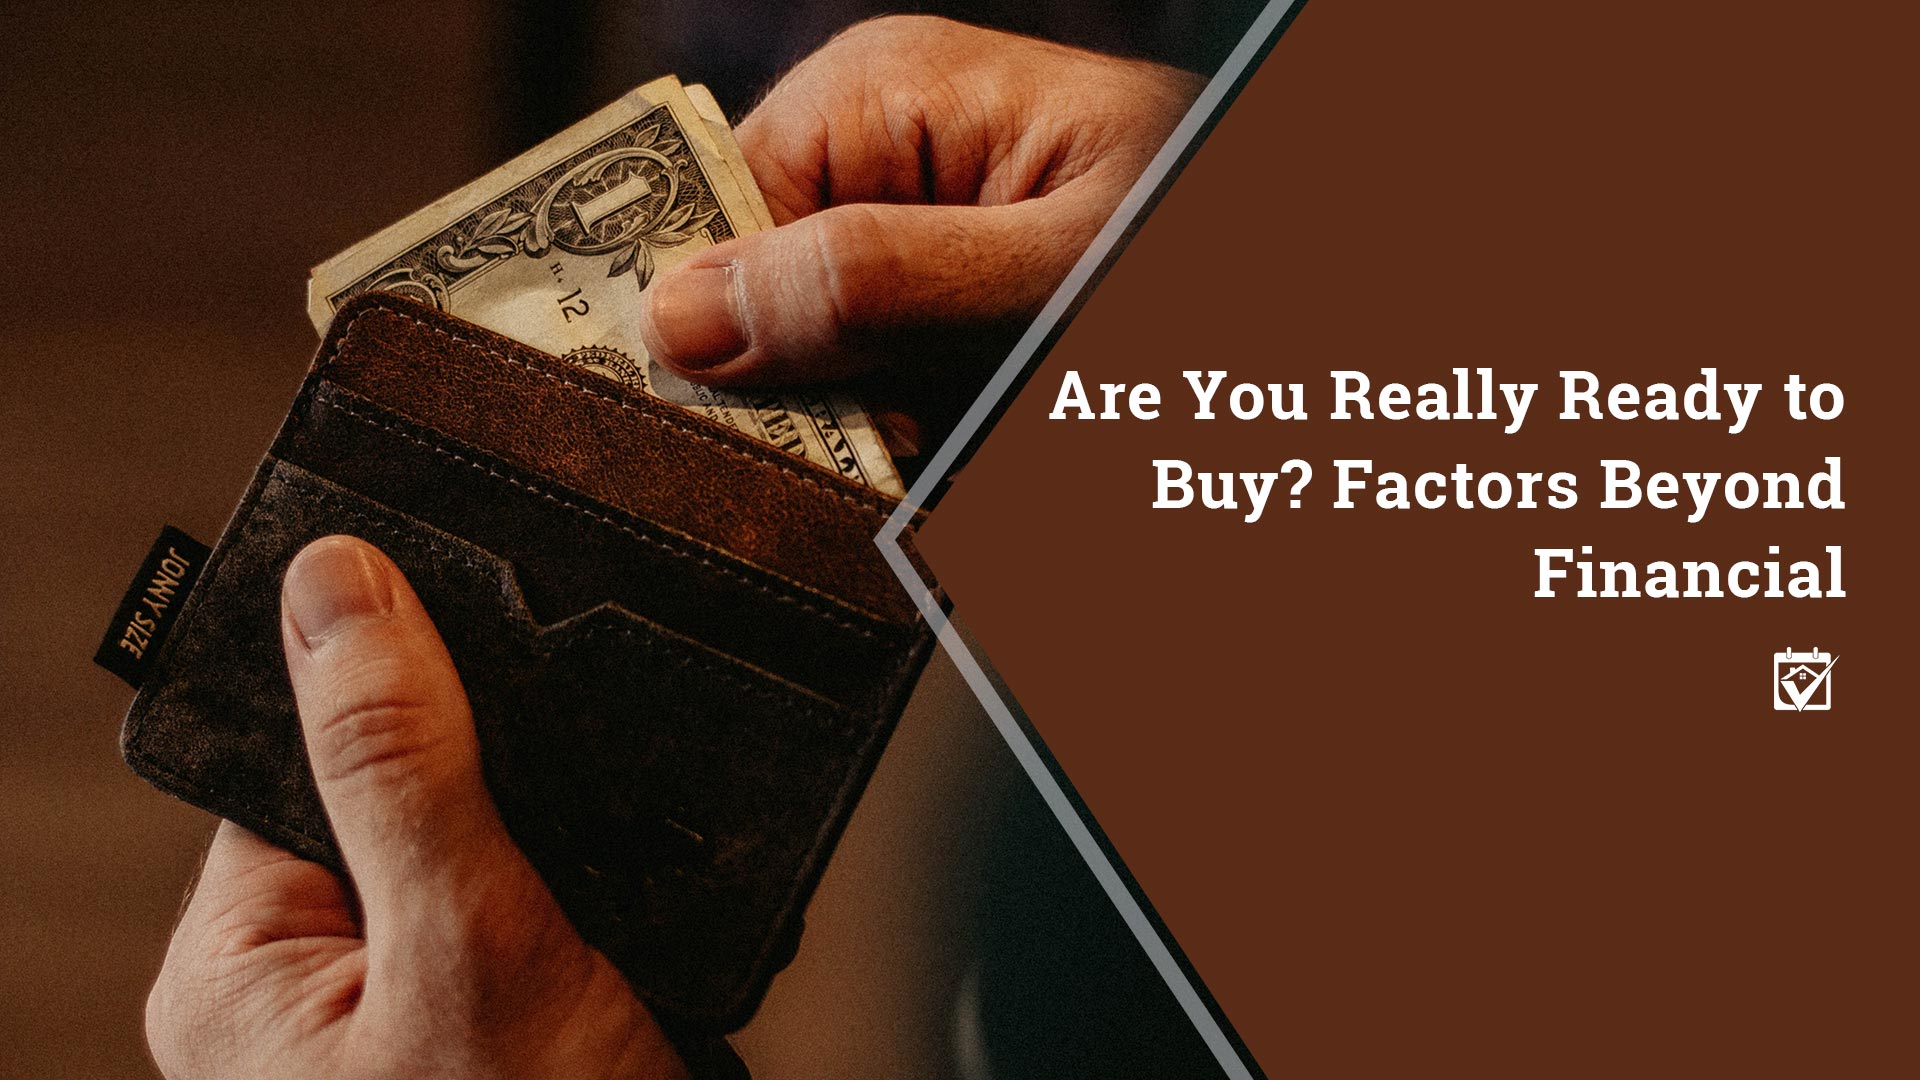 Are you really ready to buy?